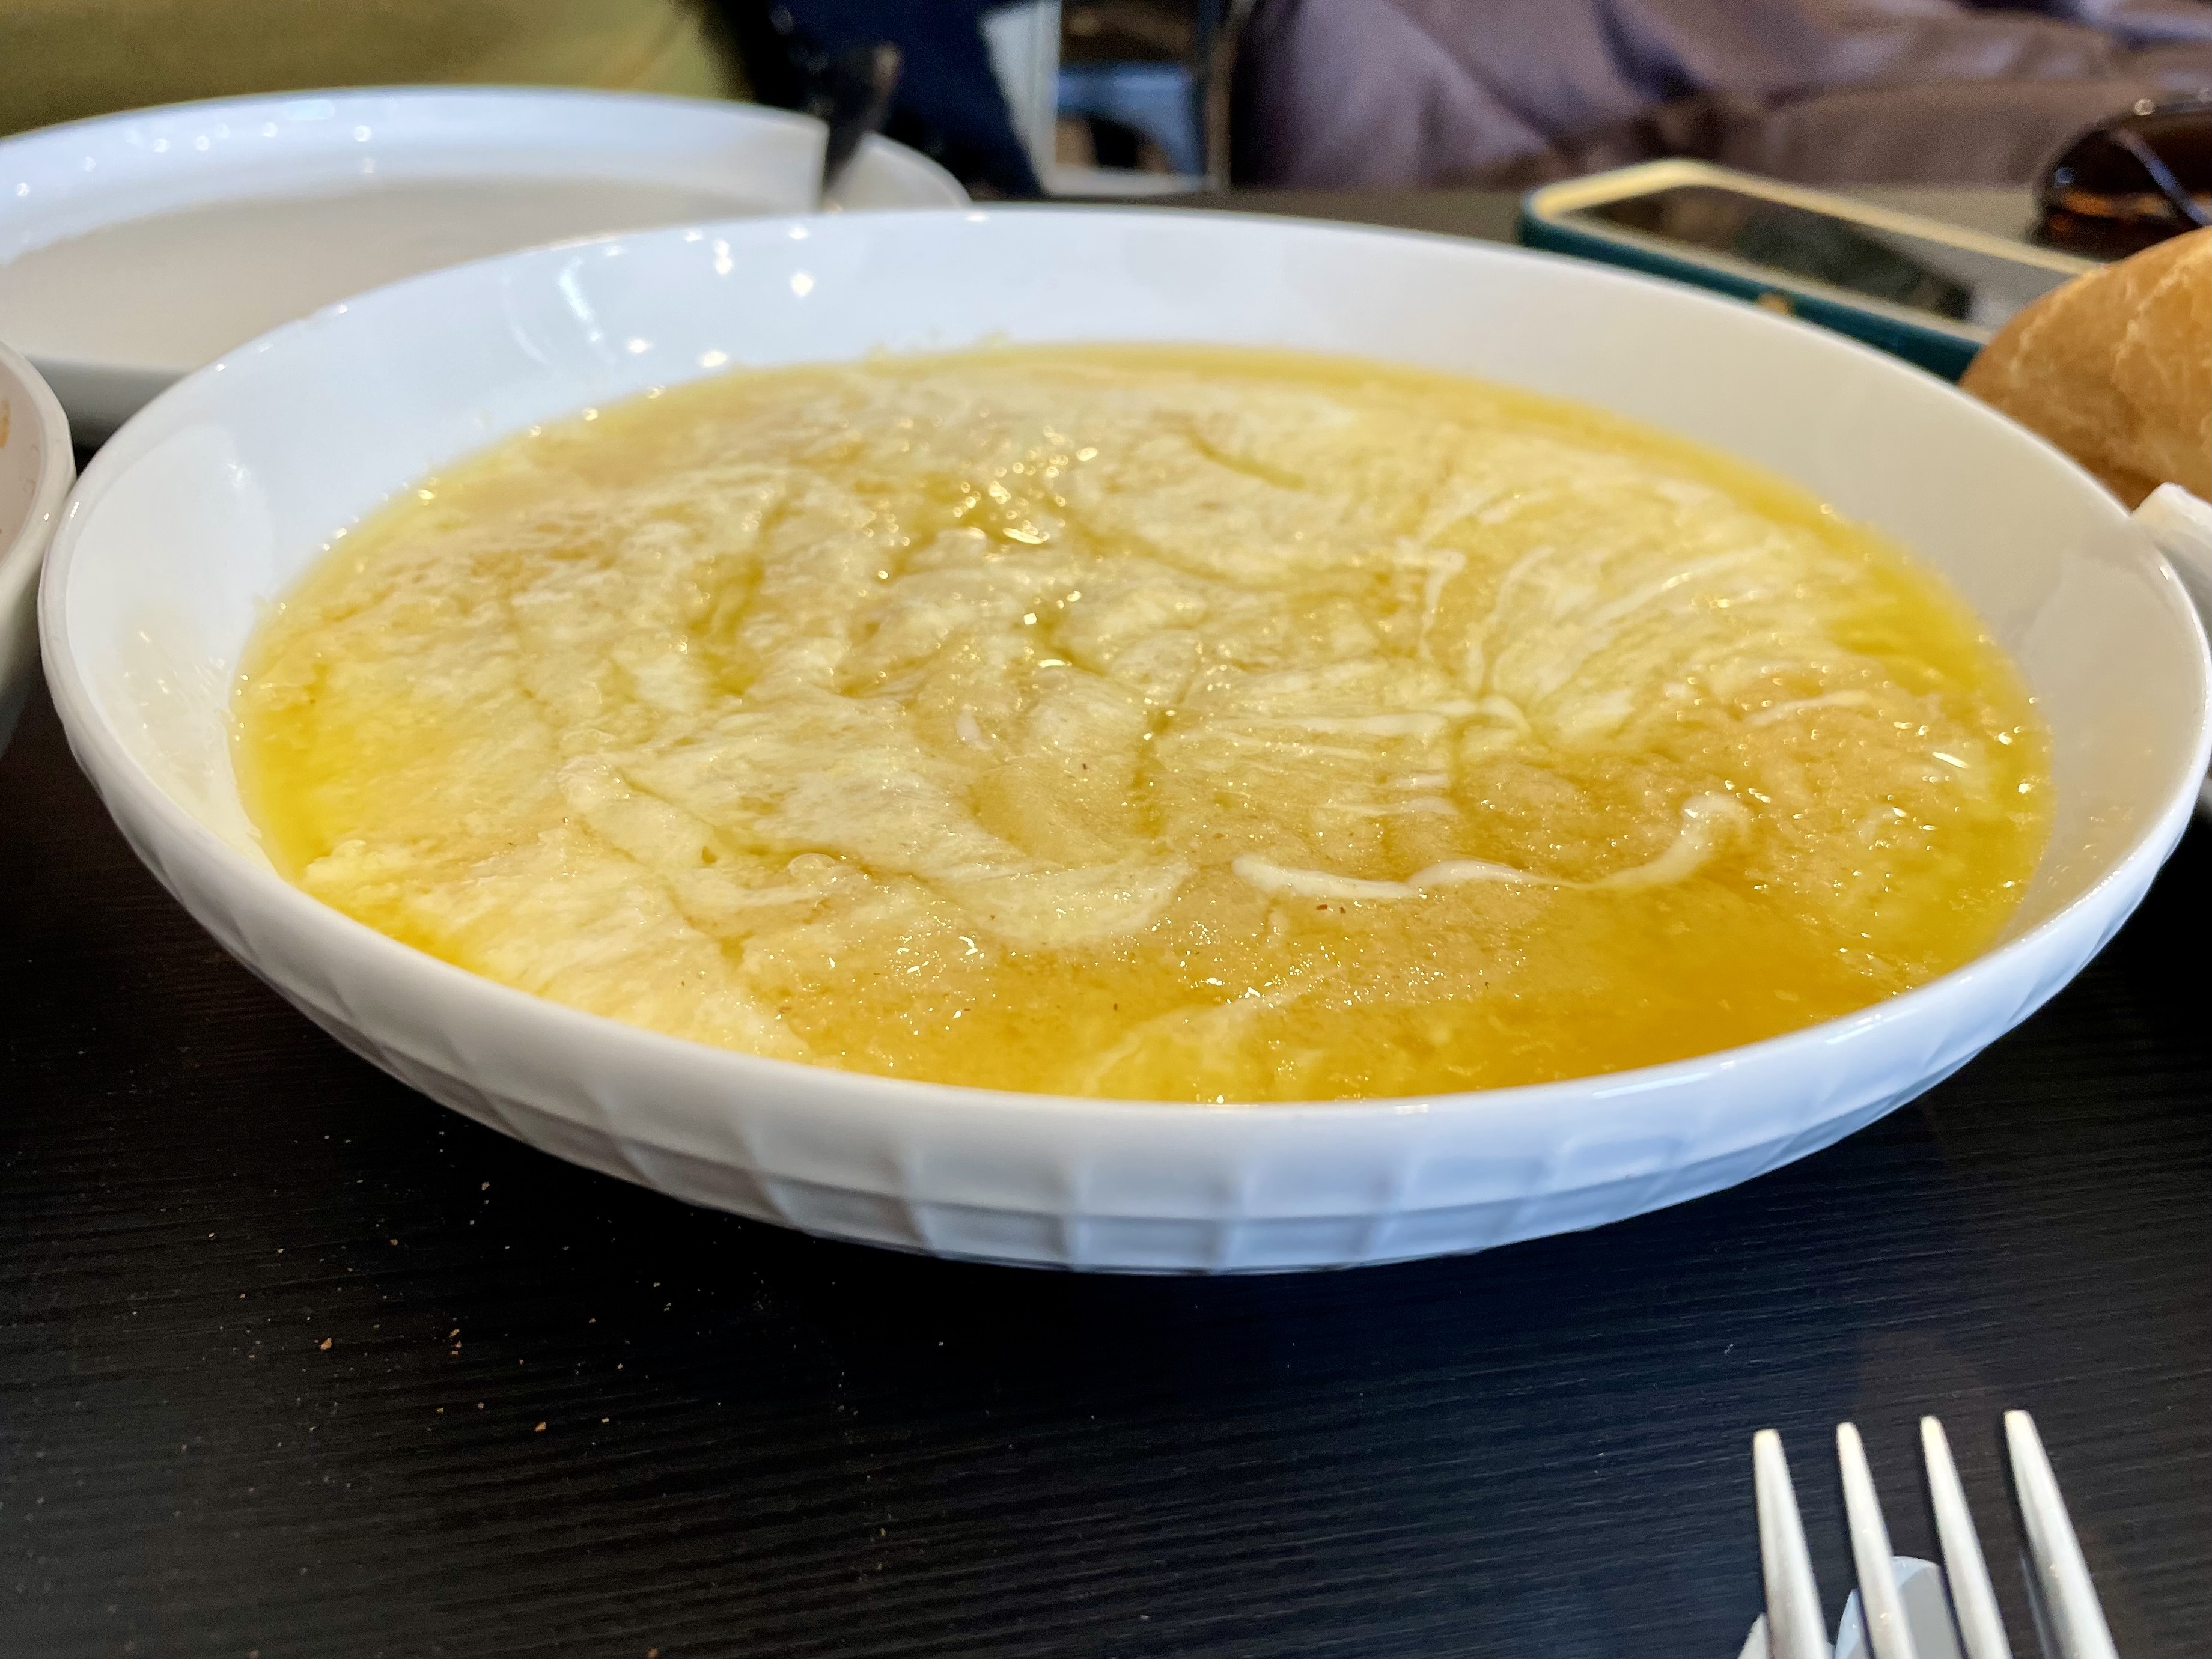 Famous for the variety that comes from the Black Sea coast of Turkey, mihlama is prepared with several types of cheese and thickened with cornmeal